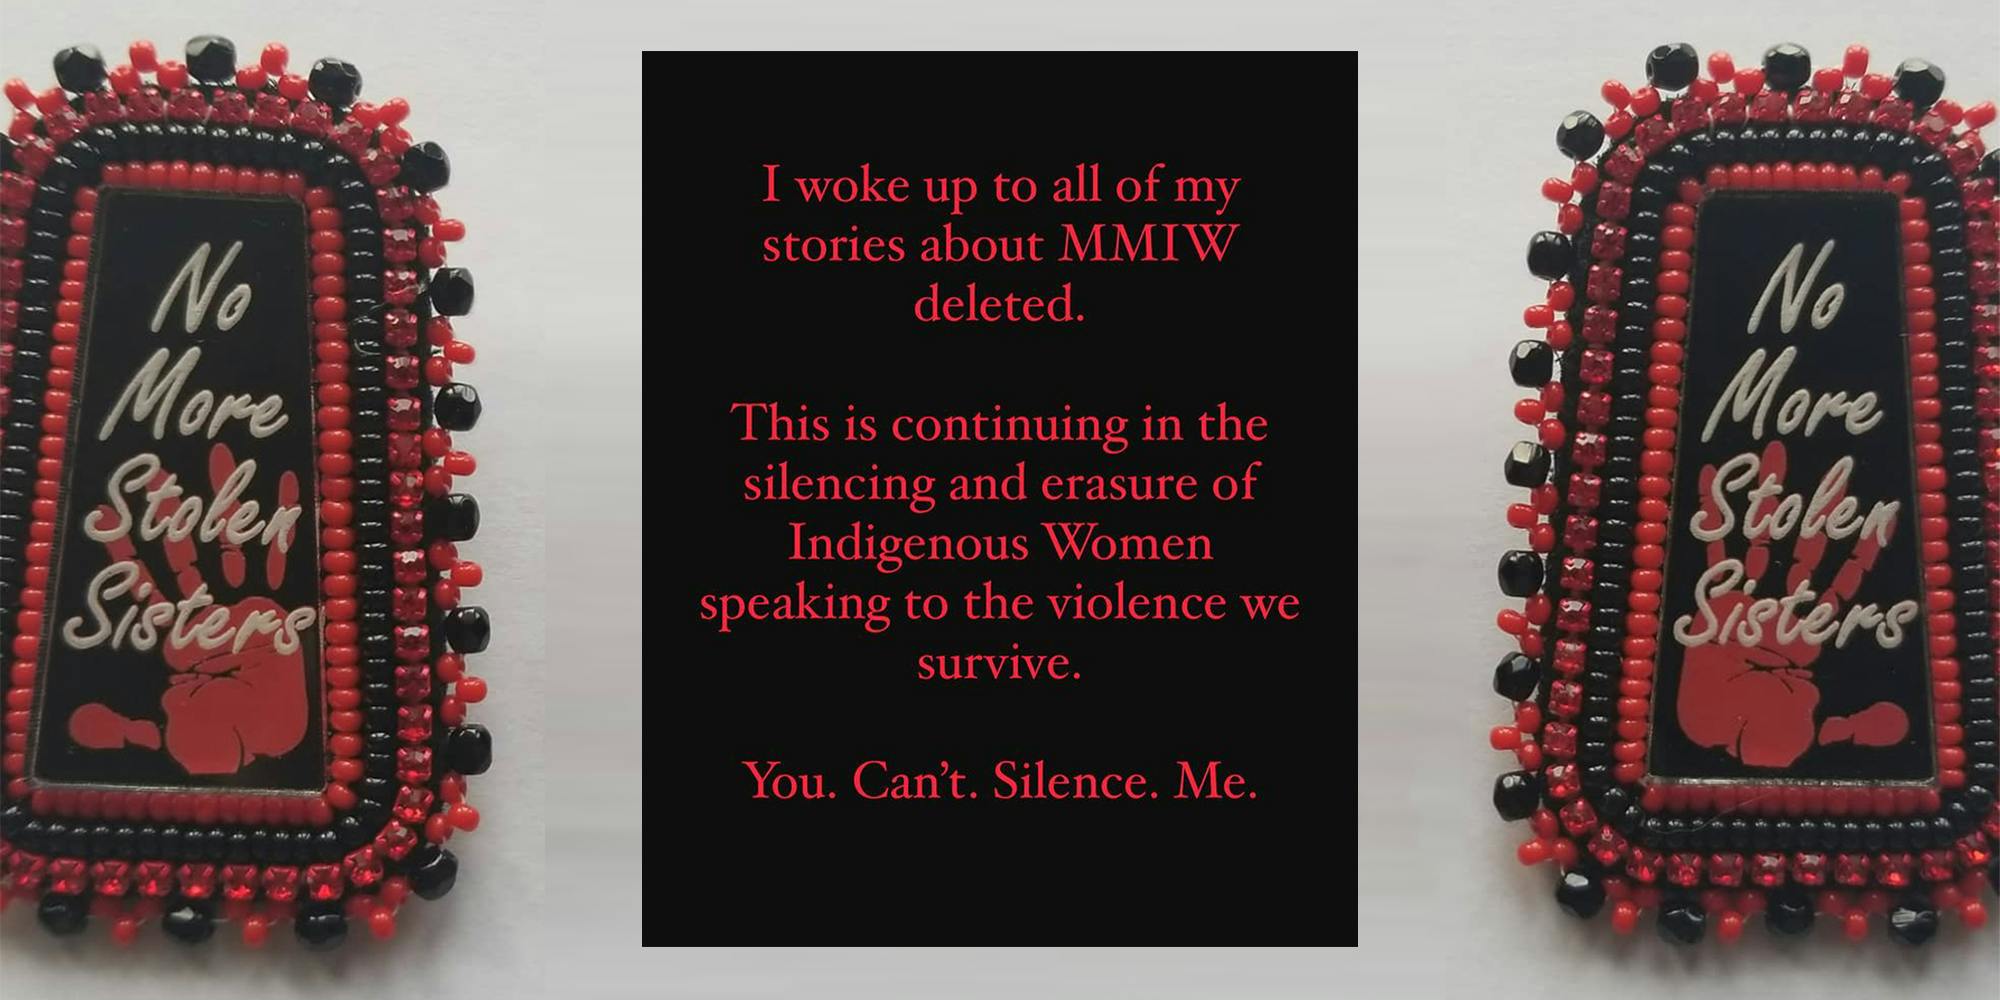 "No more stolen sisters" beadwork with "I woke up to all of my stories about MMIW deleted. This is continuing in the silencing and erasure of Indigenous Women speaking to the violence we survive. You. Can't. Silence. Me."